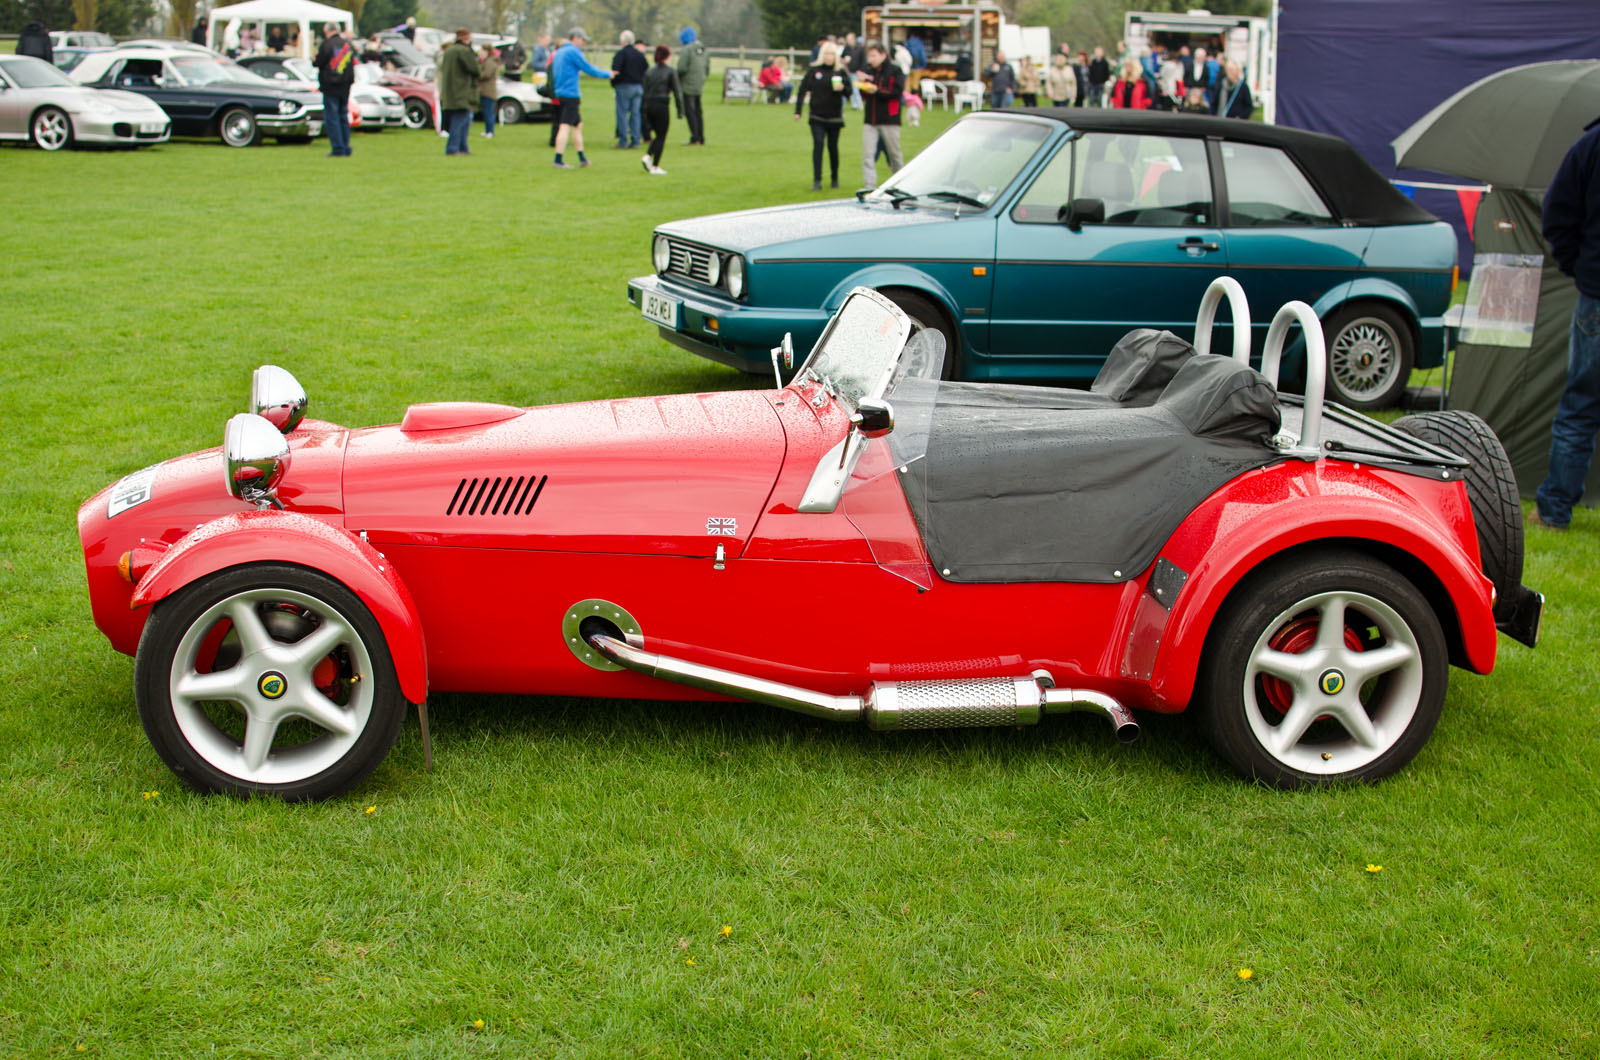 red vintage race car with side car attached to the engine